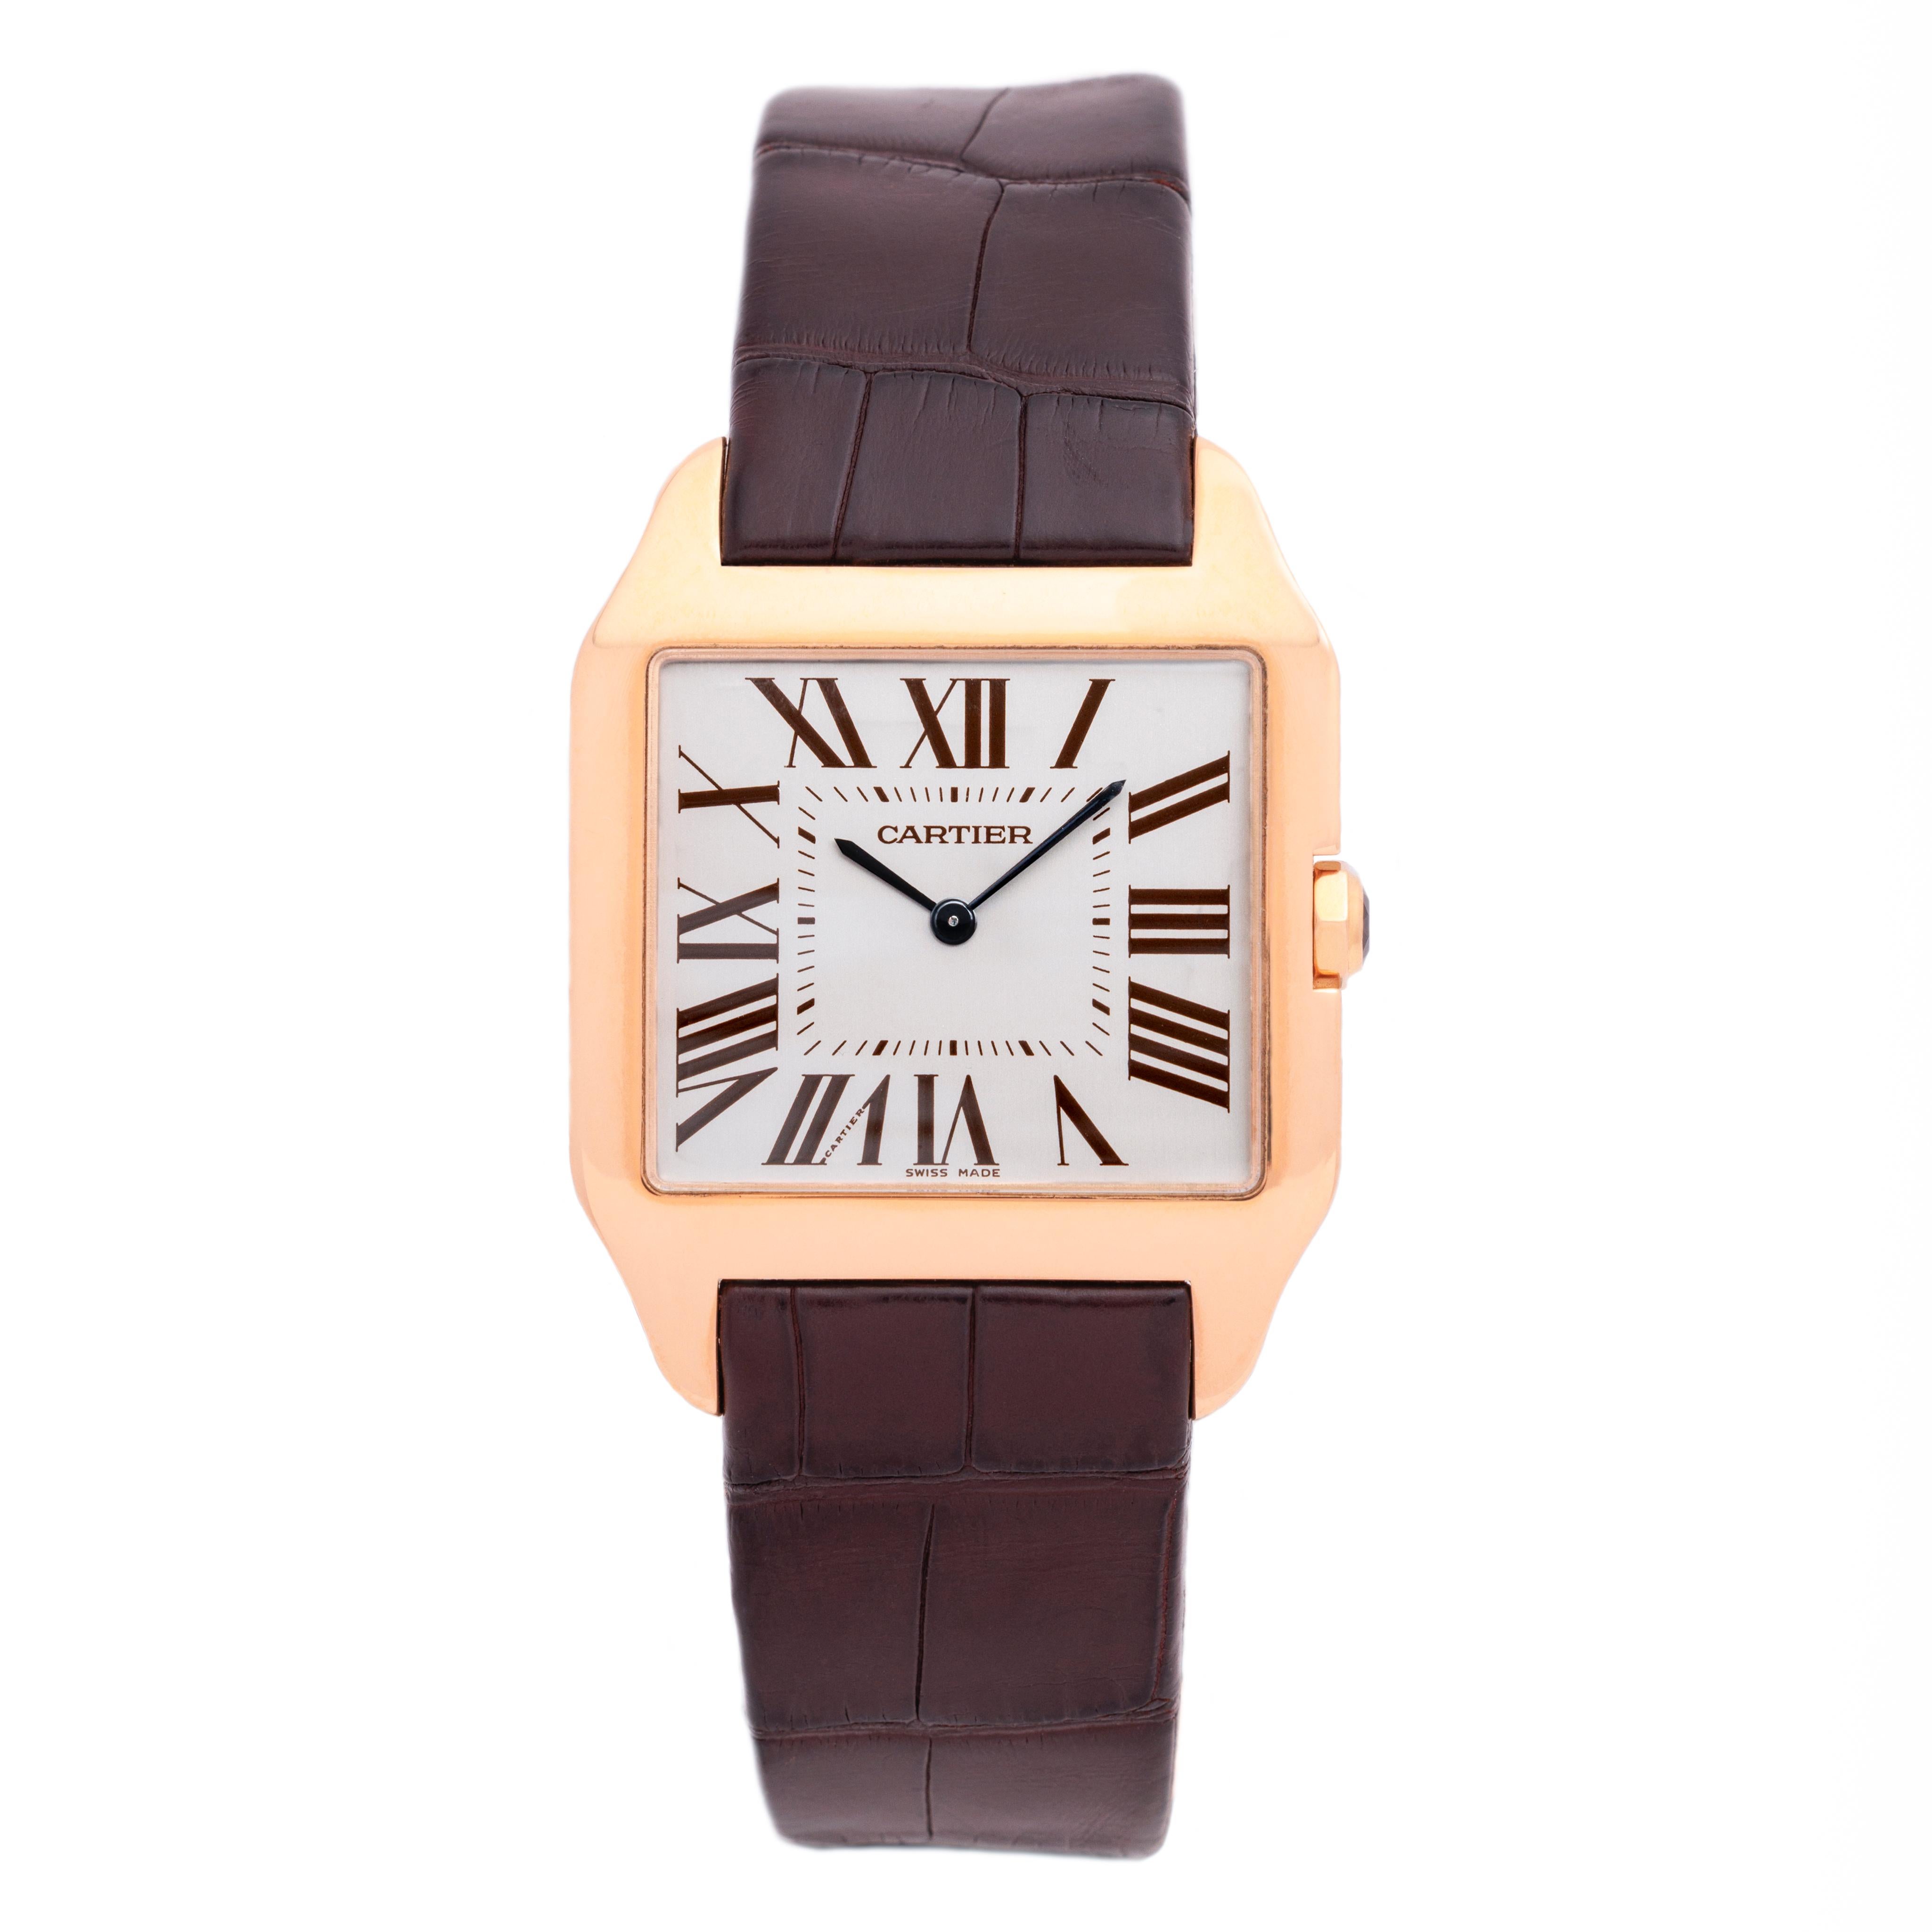 Cartier Santos Dumont Large Size Model W2006951
18k Rose Gold 
Manual Movement 
Made in Switzerland 
44.6mm x 34.6mm  
c.2000s
Adjustable strap fits up to an 8